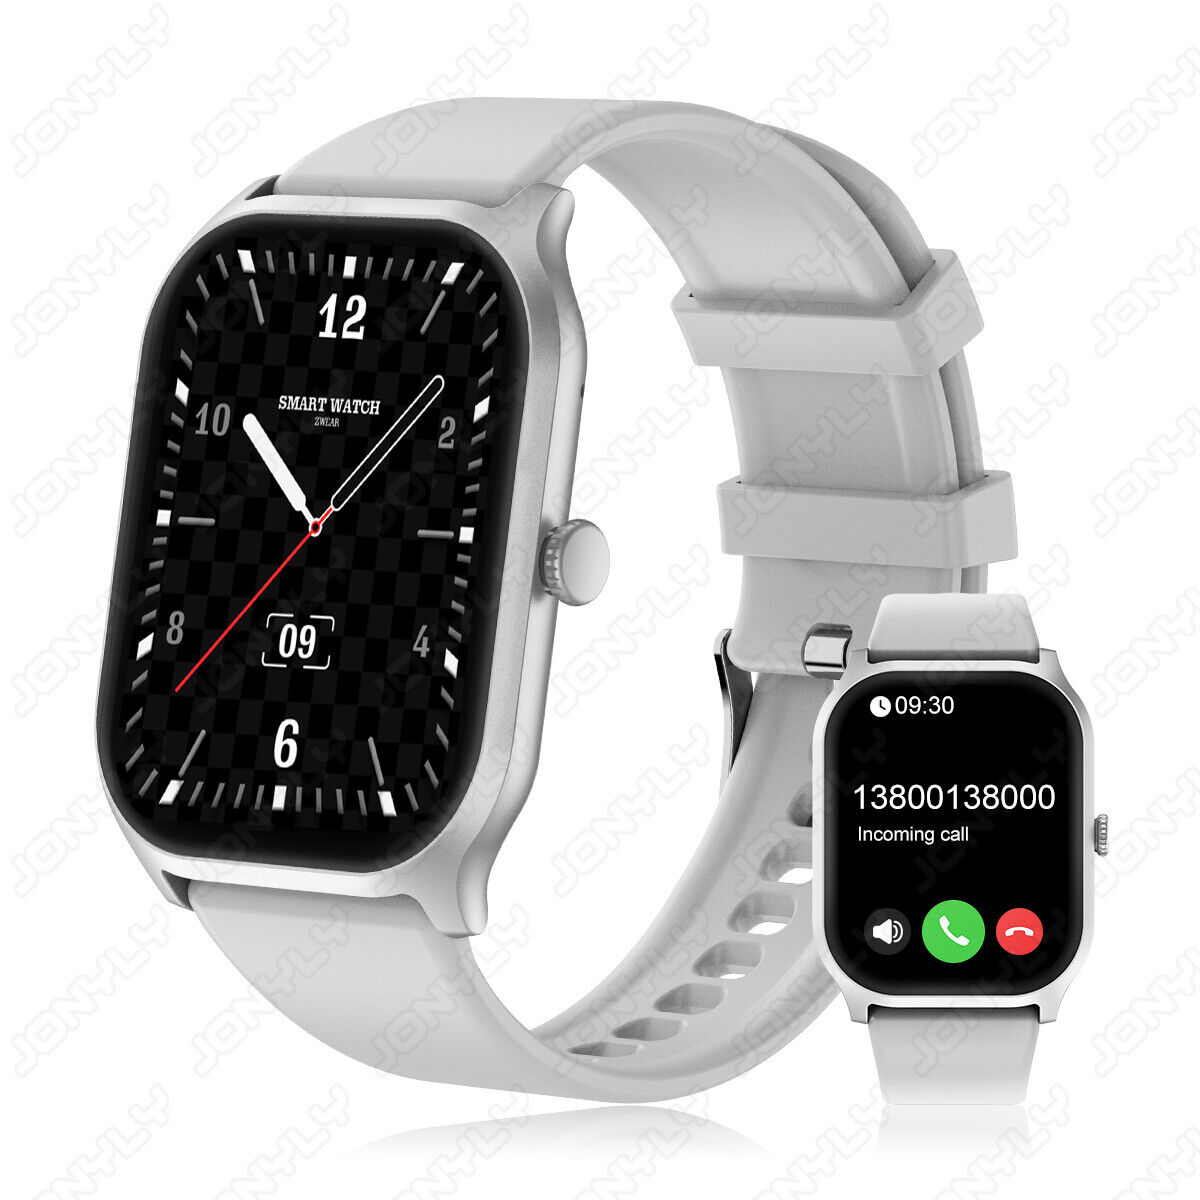 Smart Watch Men Women Heart Rate Fitness Tracker Watches for Android iOS iPhone